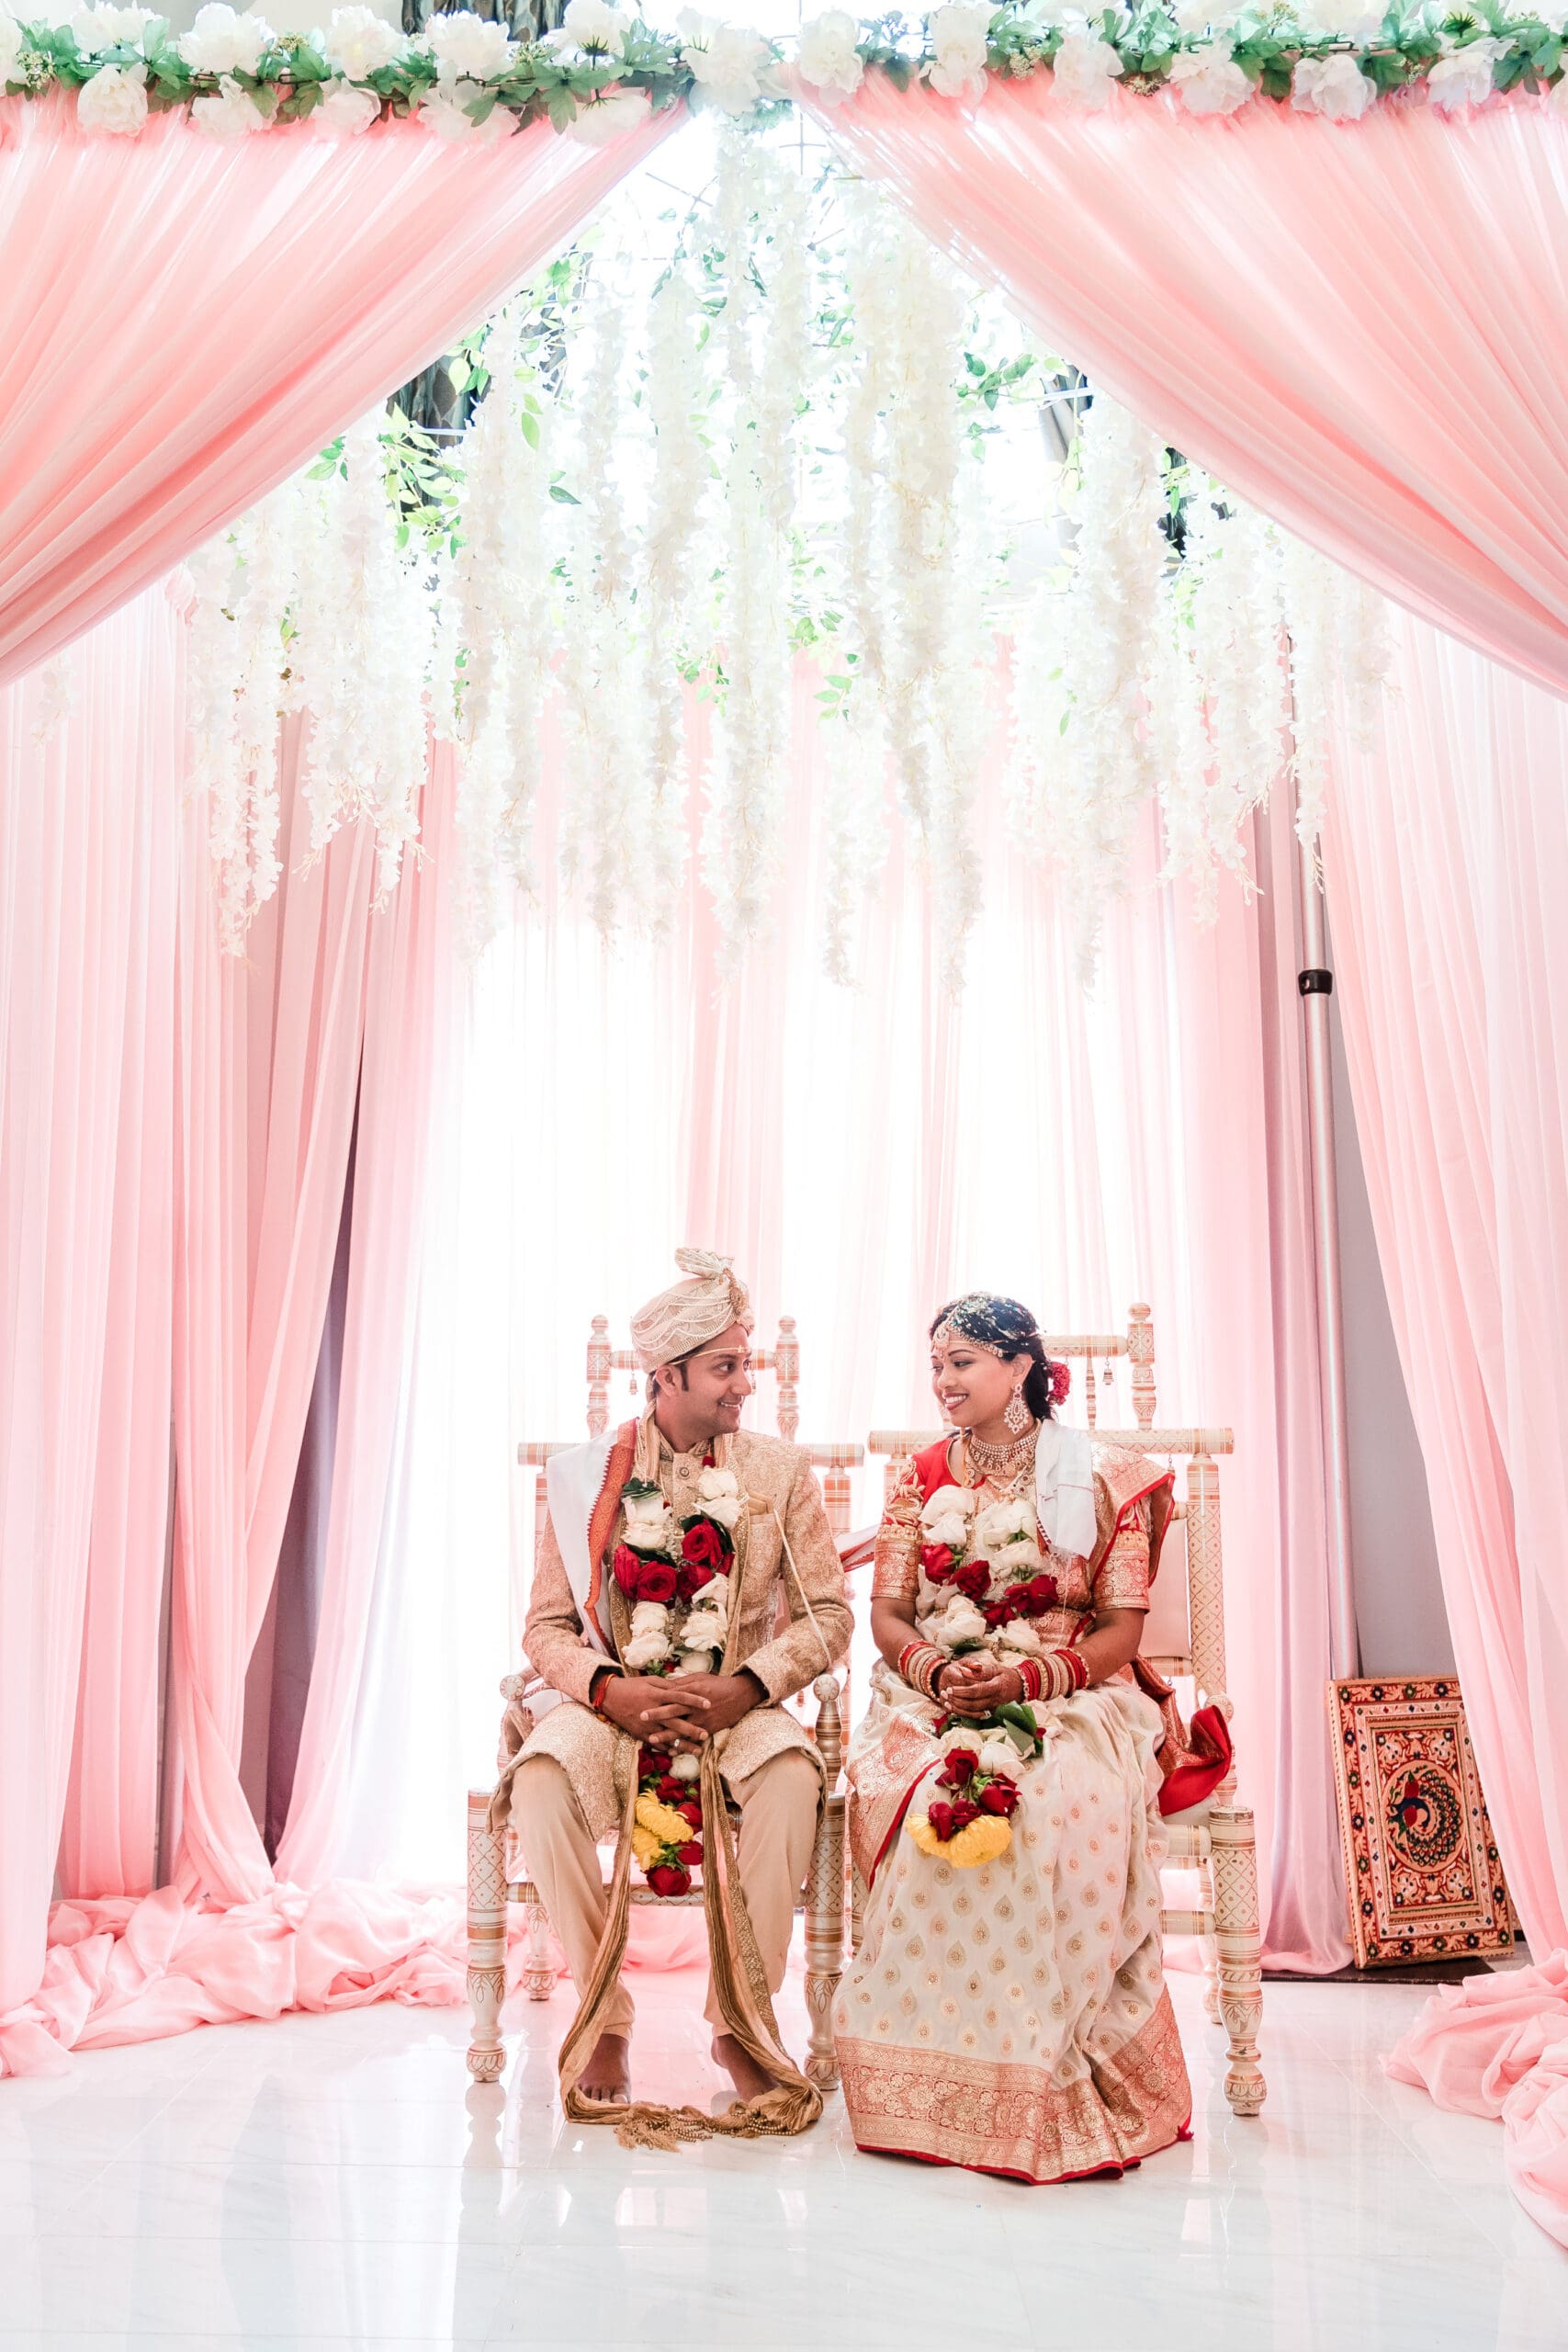 Couple in traditional Indian wedding attire holding flowers, sitting in front of window with pink decorative drapes - cultural wedding photography